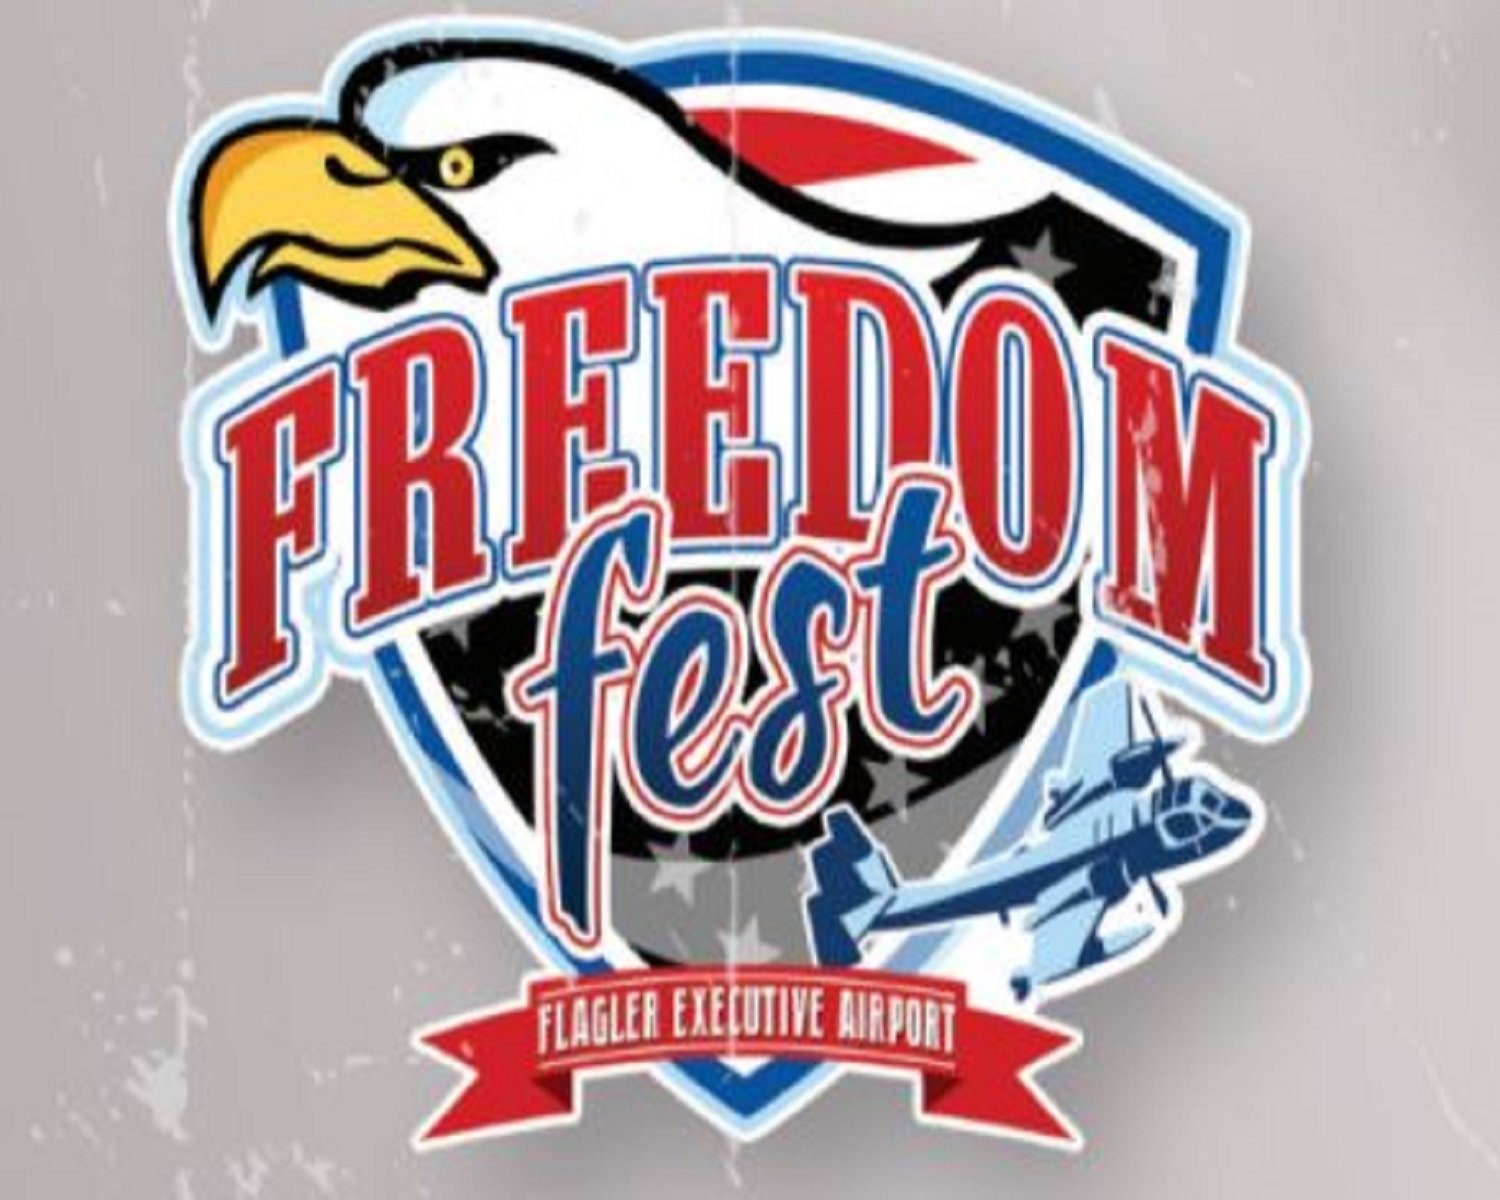 Flagler County Freedom Fest Features Warbirds and "Whirlybirds" WNDB